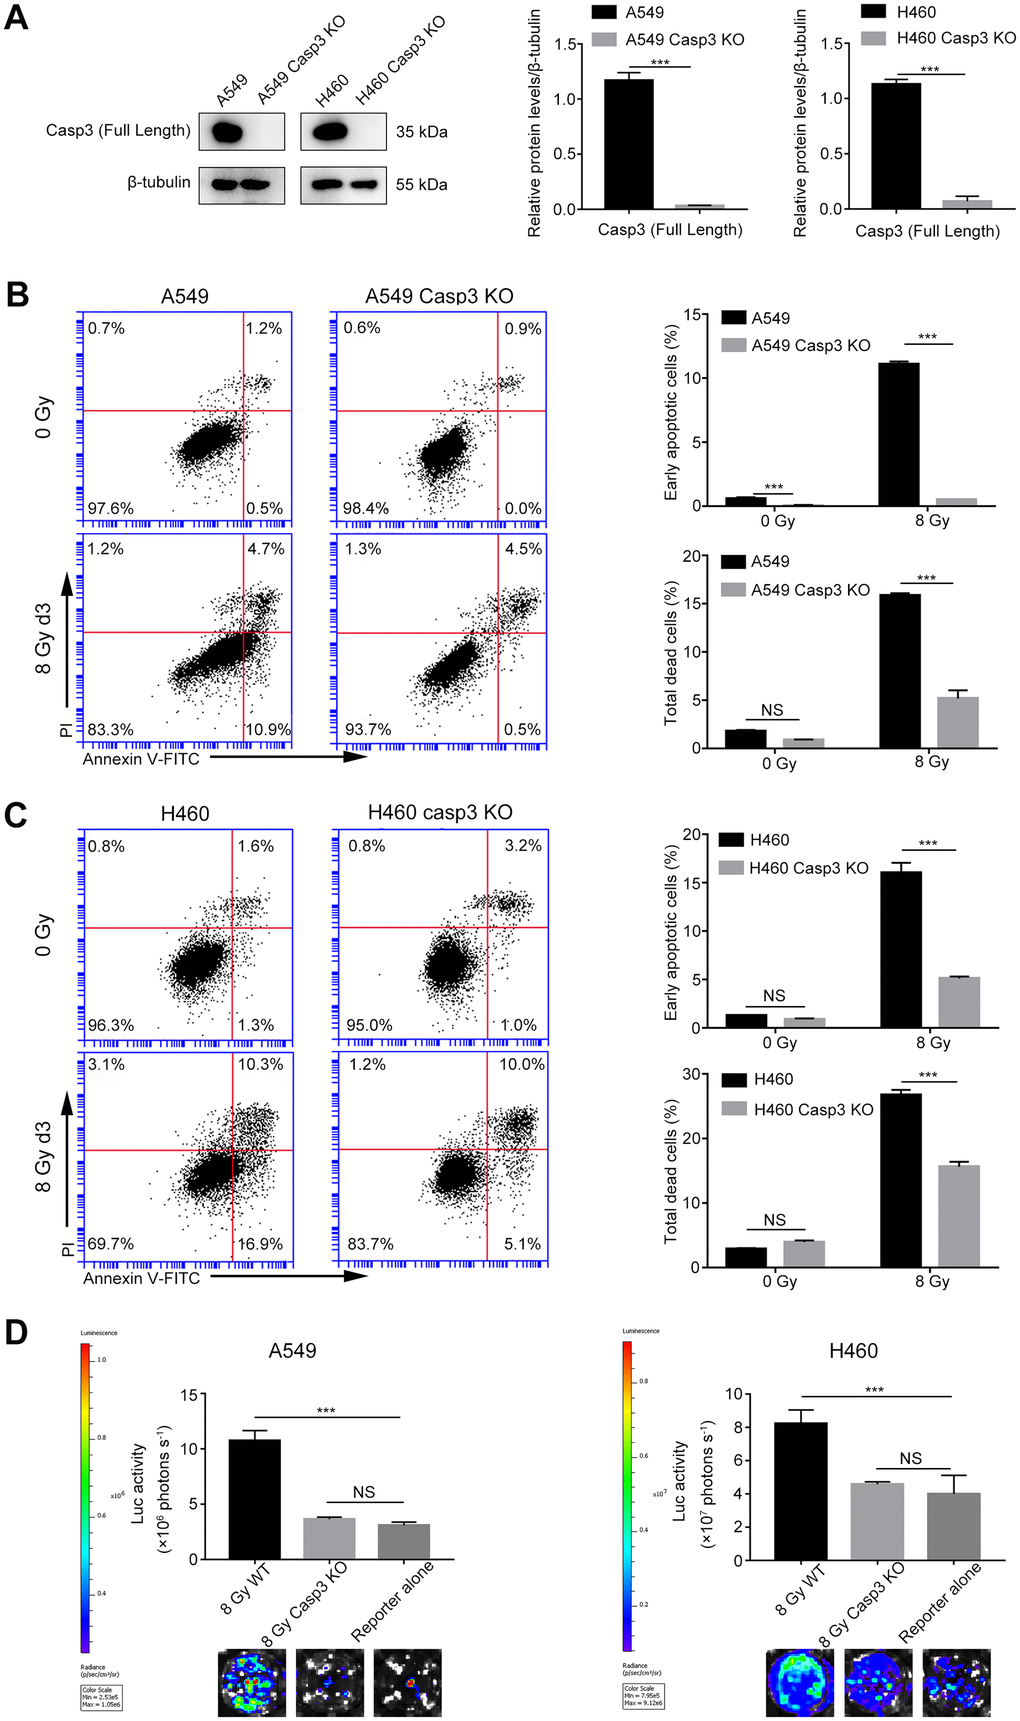 Casp3 KO attenuates radiation-induced apoptosis and growth-promoting effect of dying NSCLC cells. (A) Western blot analysis of the expression of caspase-3 in Casp3 KO A549 and H460 cells generated using the CRISPR/Cas9 system. β-tubulin was used as the loading control (***pt test, n = 3). (B, C) The left panel shows the flow cytometry analysis of cell death in A549 and A549/Casp3 KO (B) and H460 and H460/Casp3 KO (C) cells following irradiation. Apoptotic cells were analyzed by Annexin V/propidium iodide (PI) double staining. The right panel shows the quantitative analysis of early apoptosis and total cell death in 0 Gy- or 8 Gy-irradiated control and A549/Casp3 KO (B) and H460/Casp3 KO (C) cells (***pt test, n = 3). (D) Casp3 KO significantly decreased the growth-promoting effect of 8 Gy-irradiated NSCLC cells on living NSCLC reporter cells. The upper panel depicts the luciferase activities showing the growth of A549 Fluc or H460 Fluc cells that were seeded with 8 Gy-irradiated wild-type or Casp3 KO cells or alone. The lower panel shows the representative bioluminescence images (***pn = 4).